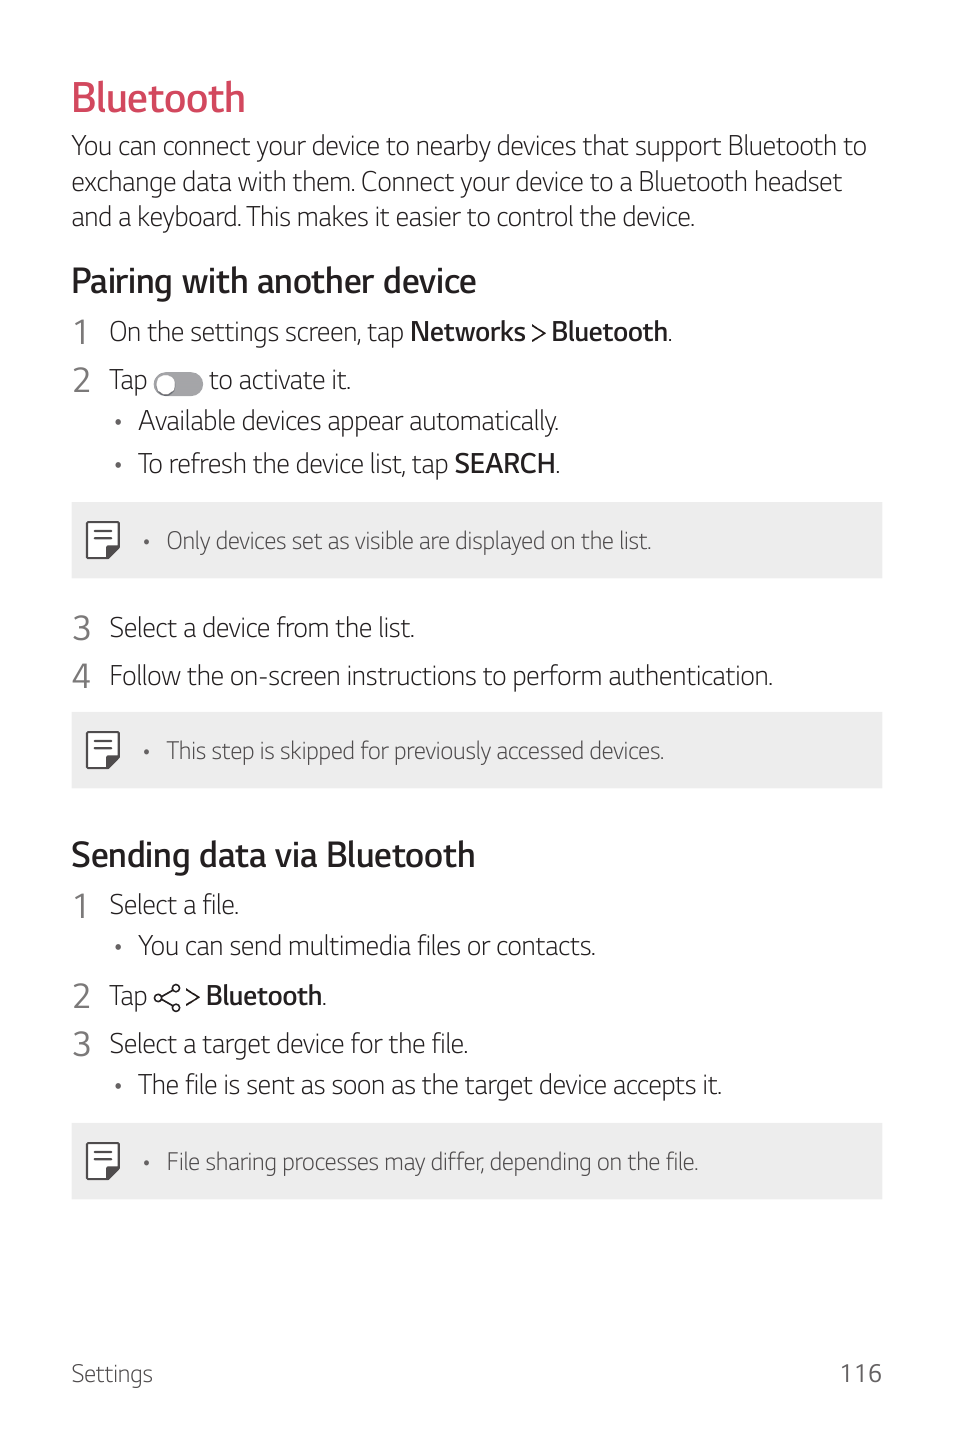 Bluetooth, Pairing with another device, Sending data via bluetooth | LG G6 H872 User Manual | Page 117 / 183